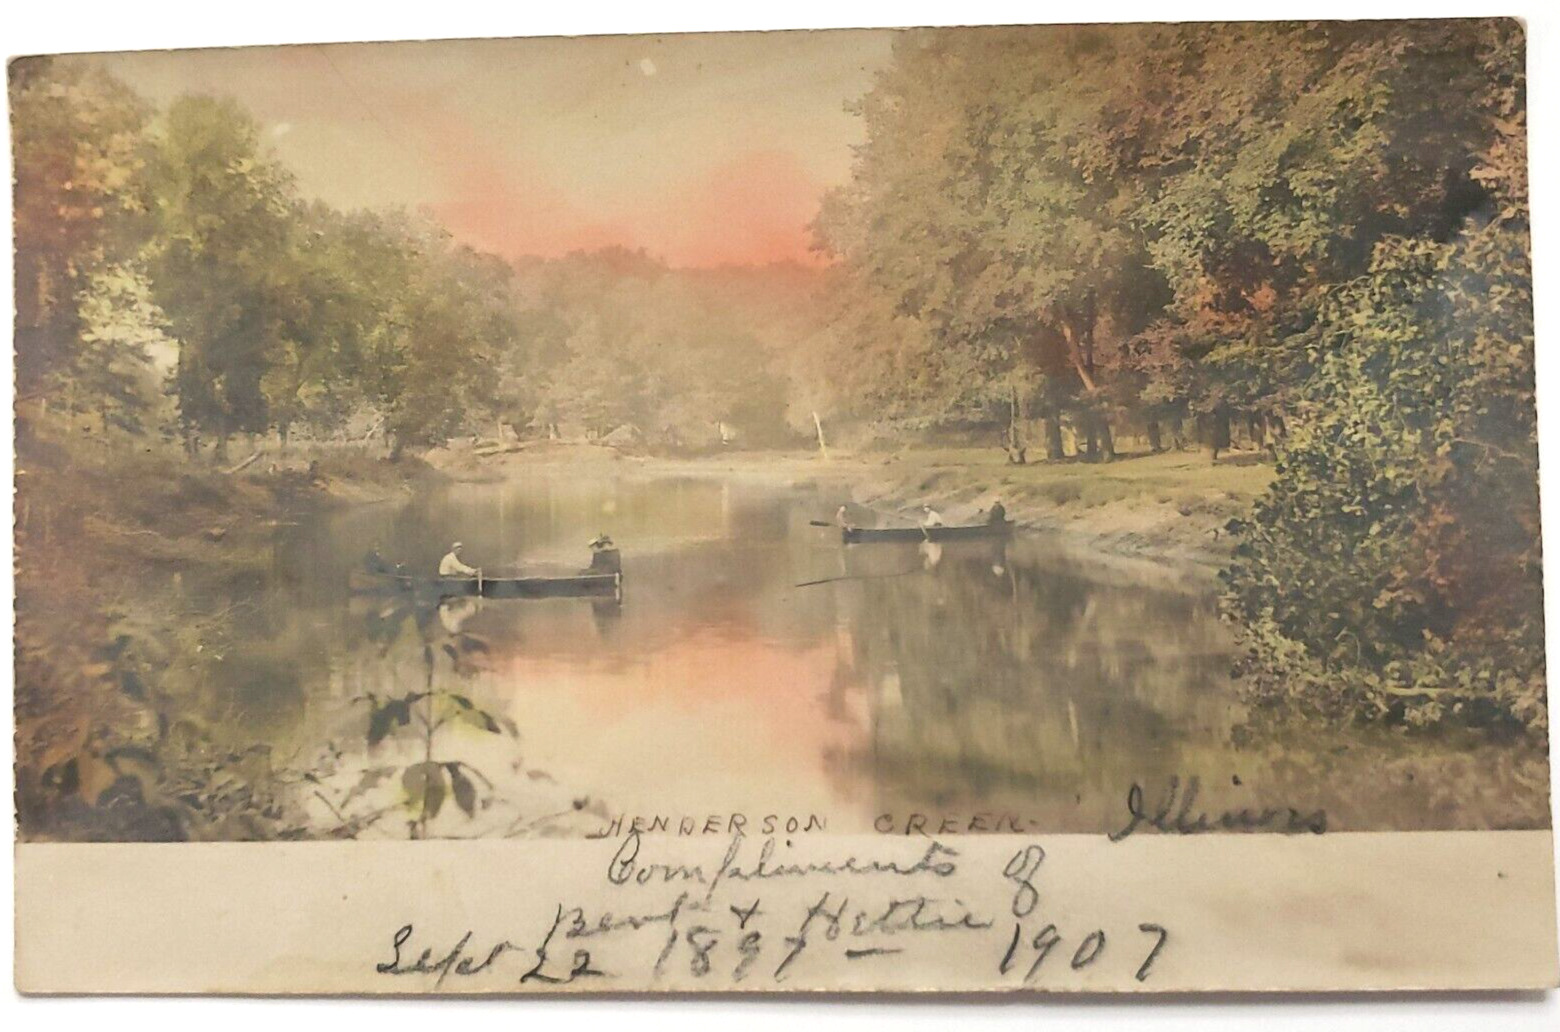 VTG Early 1900s Hand Colored Postcard Green River  / Henderson Creek Illinois 73